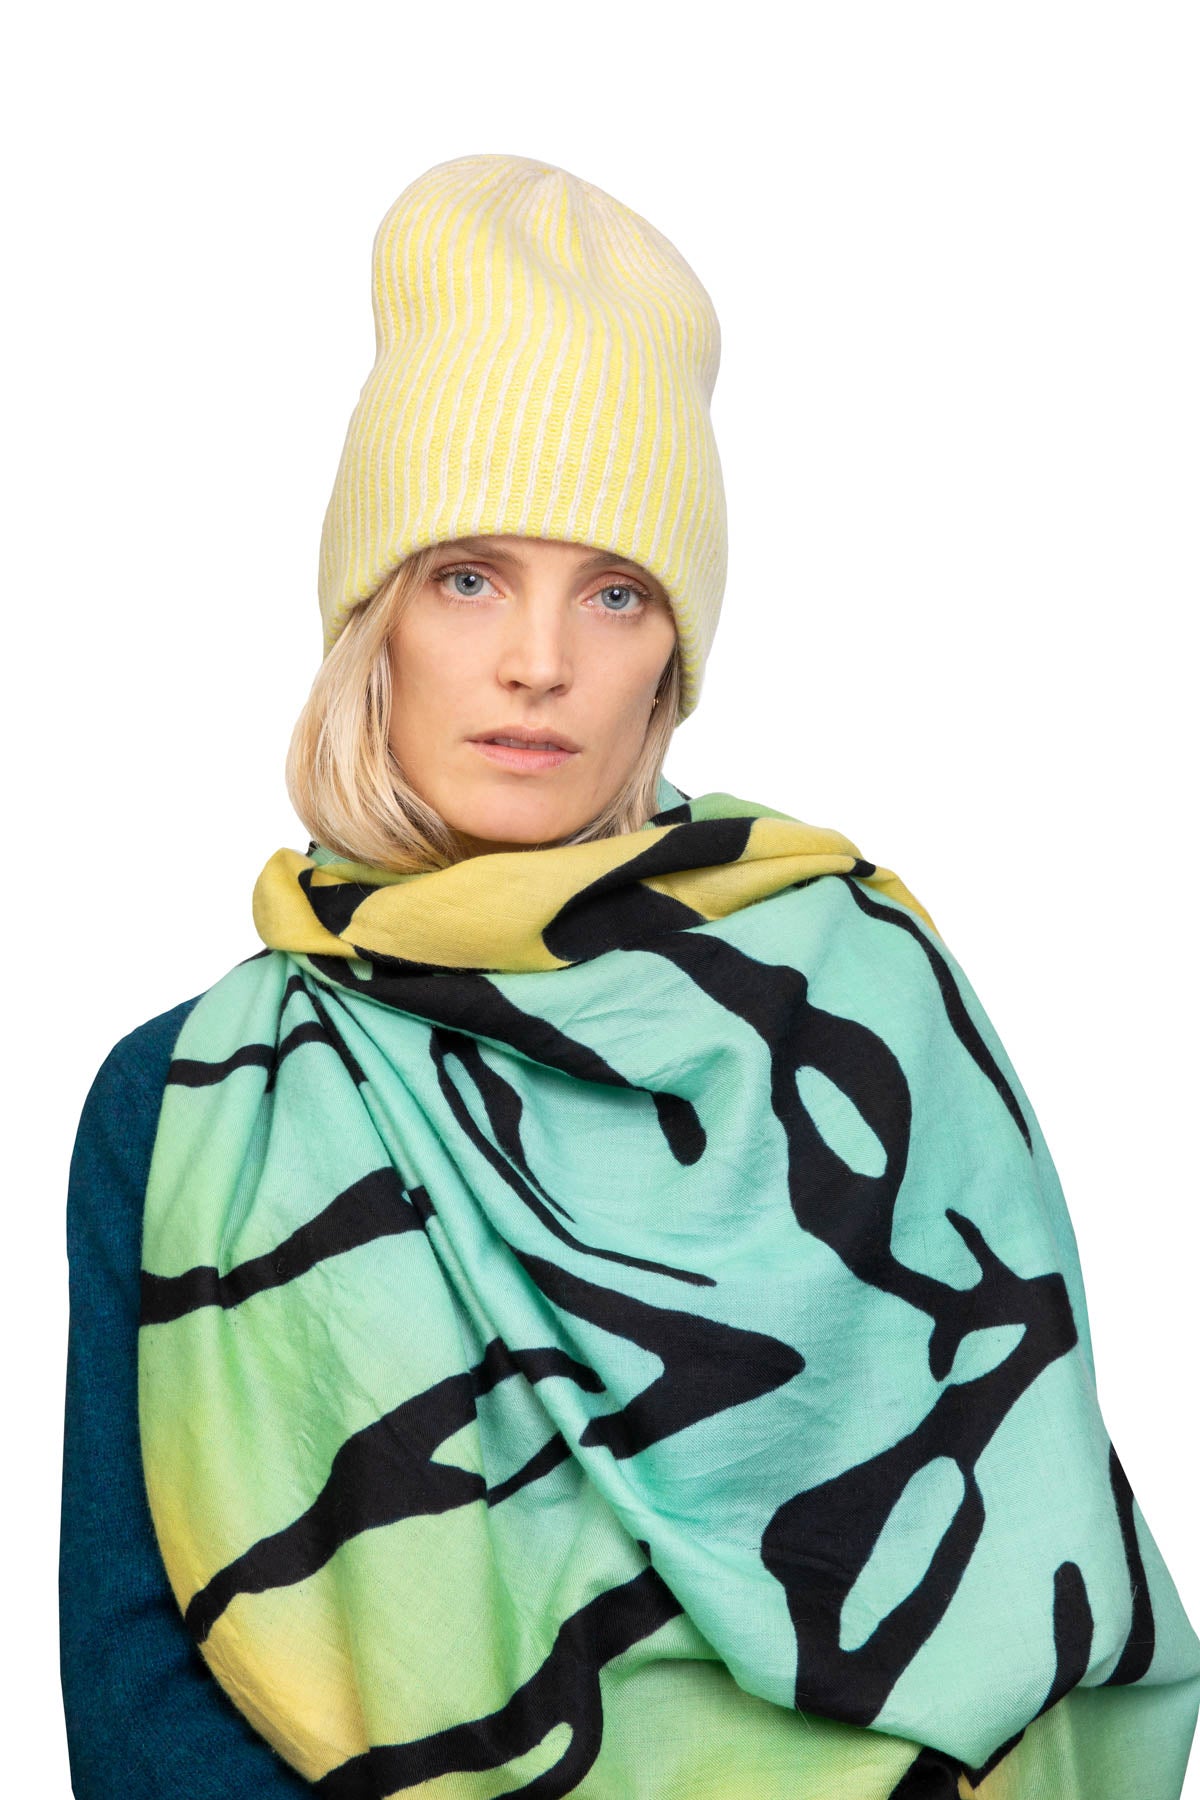 Tiger Hand-painted Ombres Shawl - Light Blue, Green, Yellow